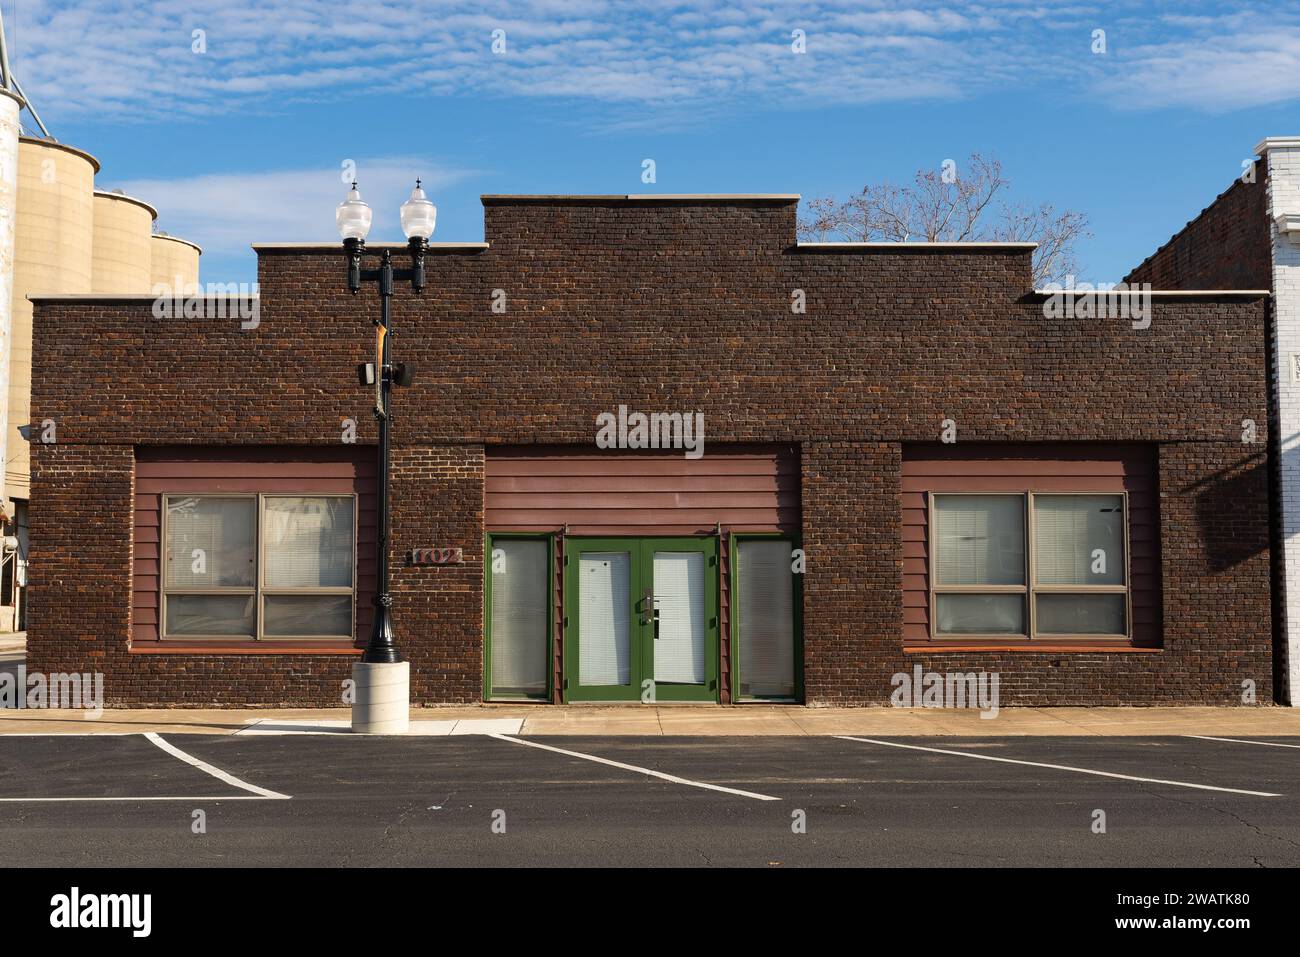 Downtown building in Flanagan, Illinois, USA. Stock Photo